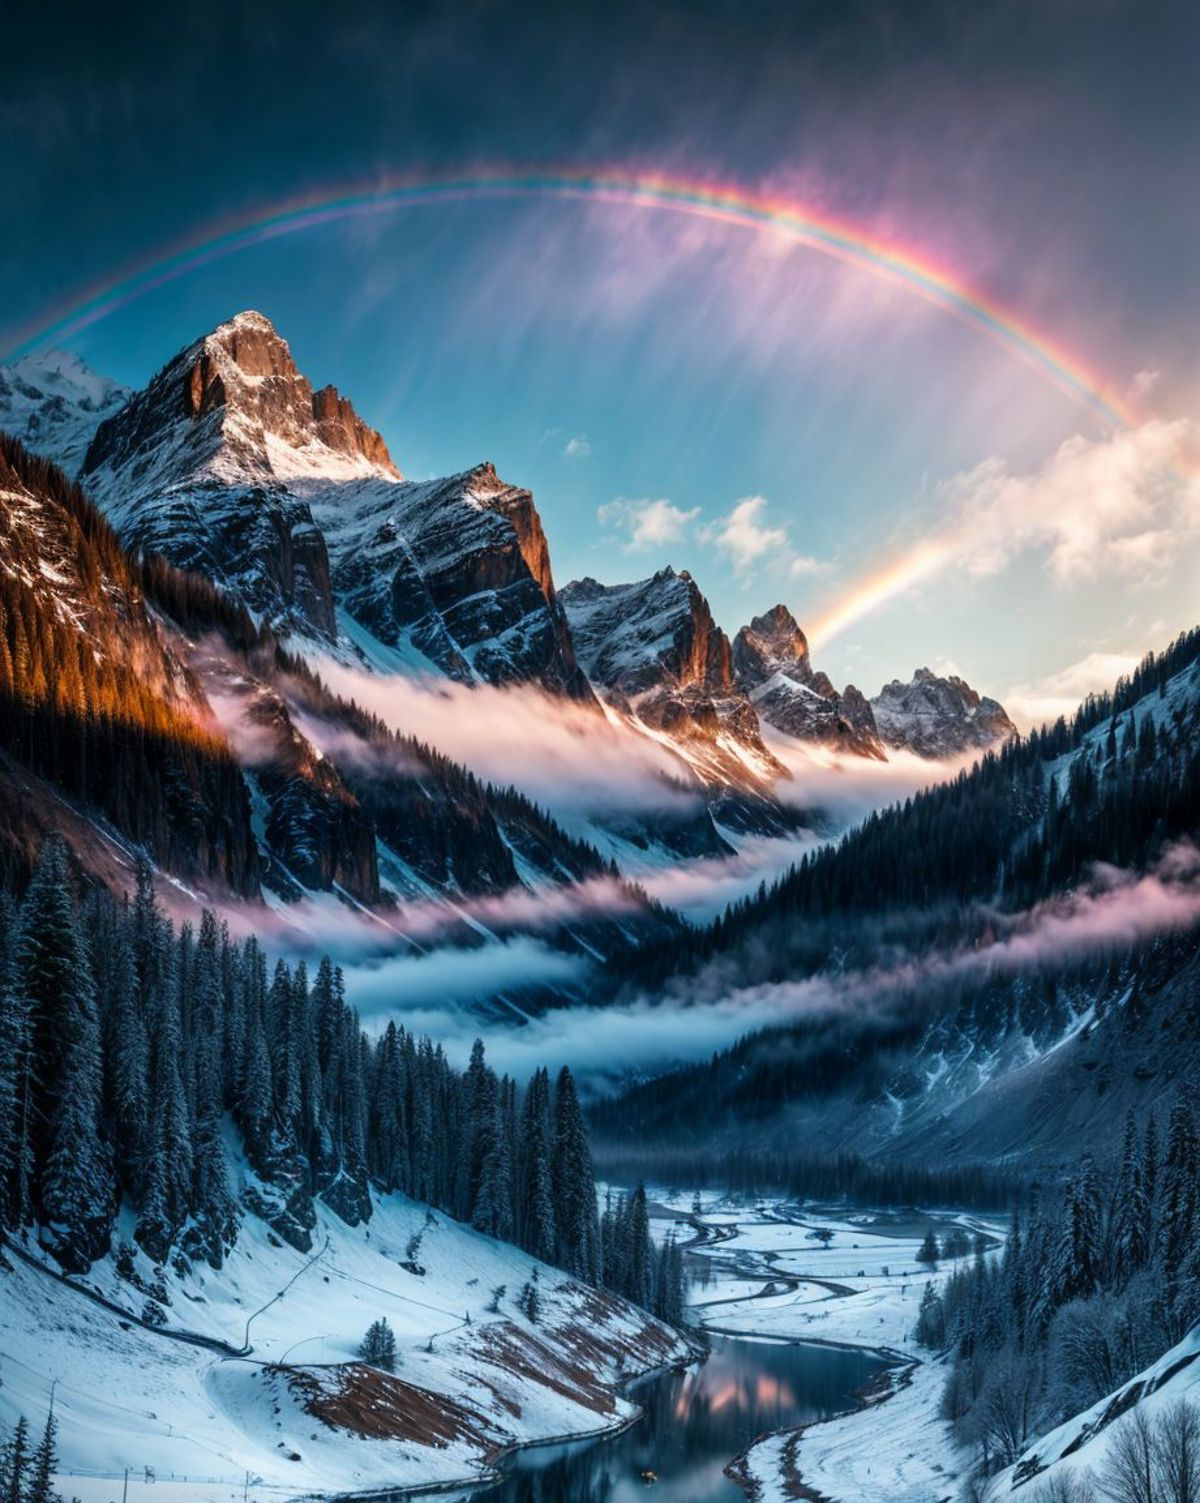 Majestic Mountain Range with a Rainbow Over the Valley